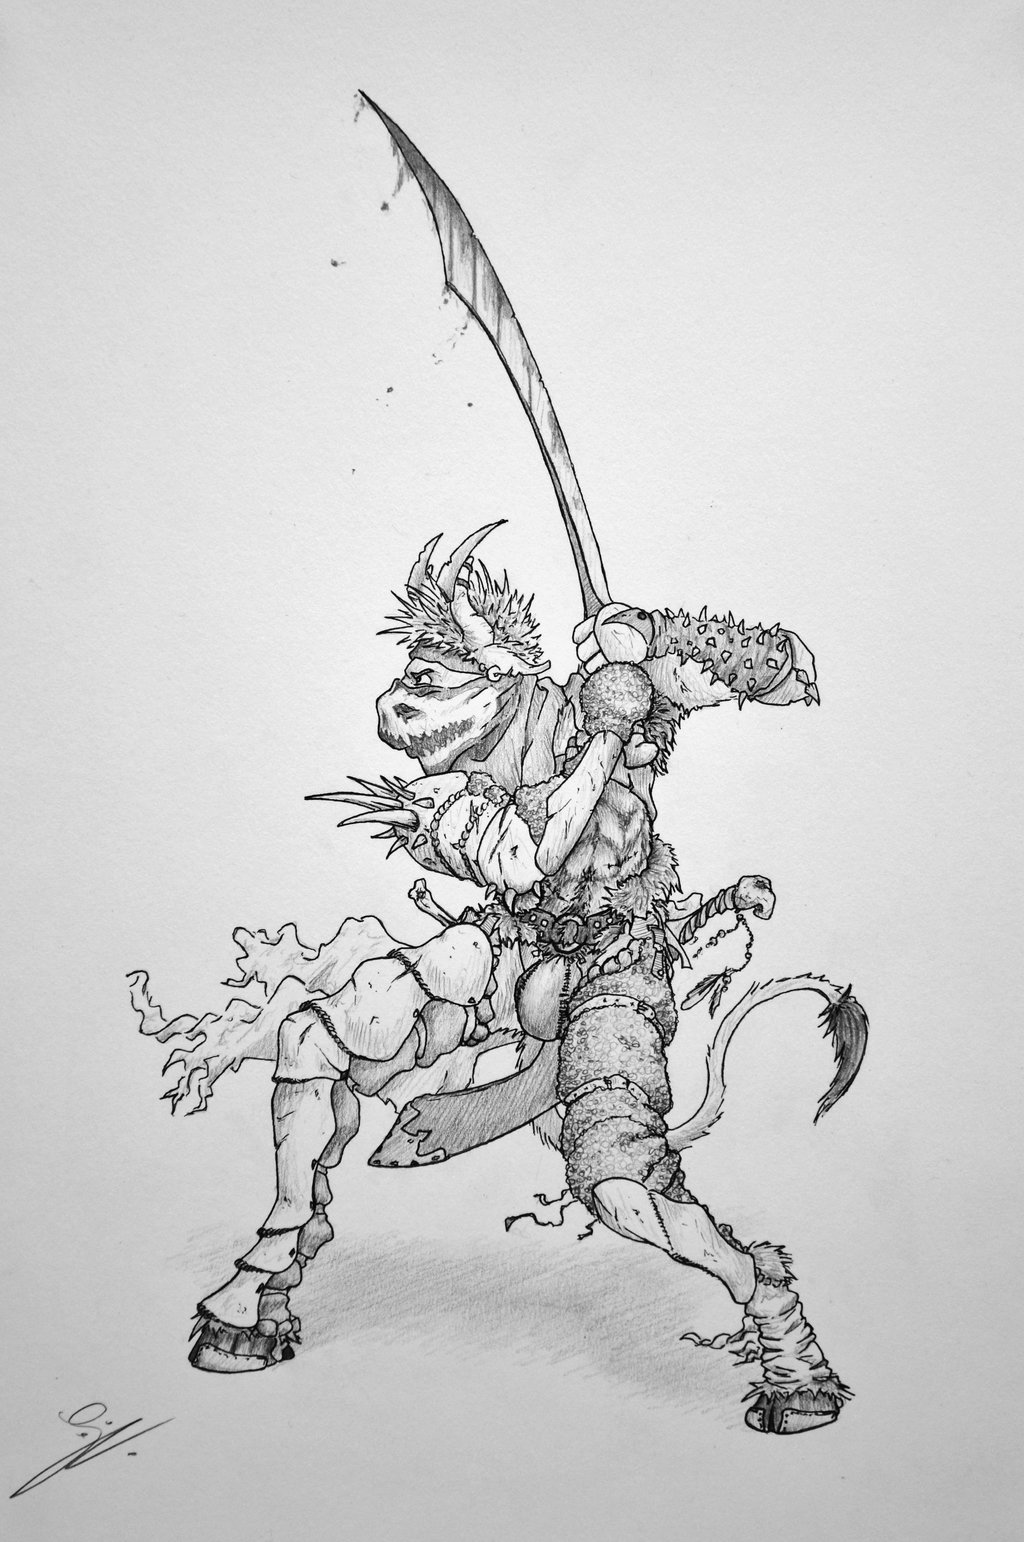 angry anthro anthro_art anthro_bovine anthro_furry anthro_minotaur anthrobovine anthrofurry anthromale armor barbarian barbarianmale barbarianwarrior barbaric battle blood bloodsplach bovine clothing dagootter dark duel fantasy fantasyarmor fantasyarmour fantasysword fierce fight furryanthro gore hairs hooves invalid_tag jackstrap leather leatherarmor leatherarmour leatherboots leatherloincloth loincloth male mammal melee_weapon minotaur muscular muscular_male muscules off pants pissedoff salvestro sixpack smile speedo swimsuit sword violence war warrior weapon